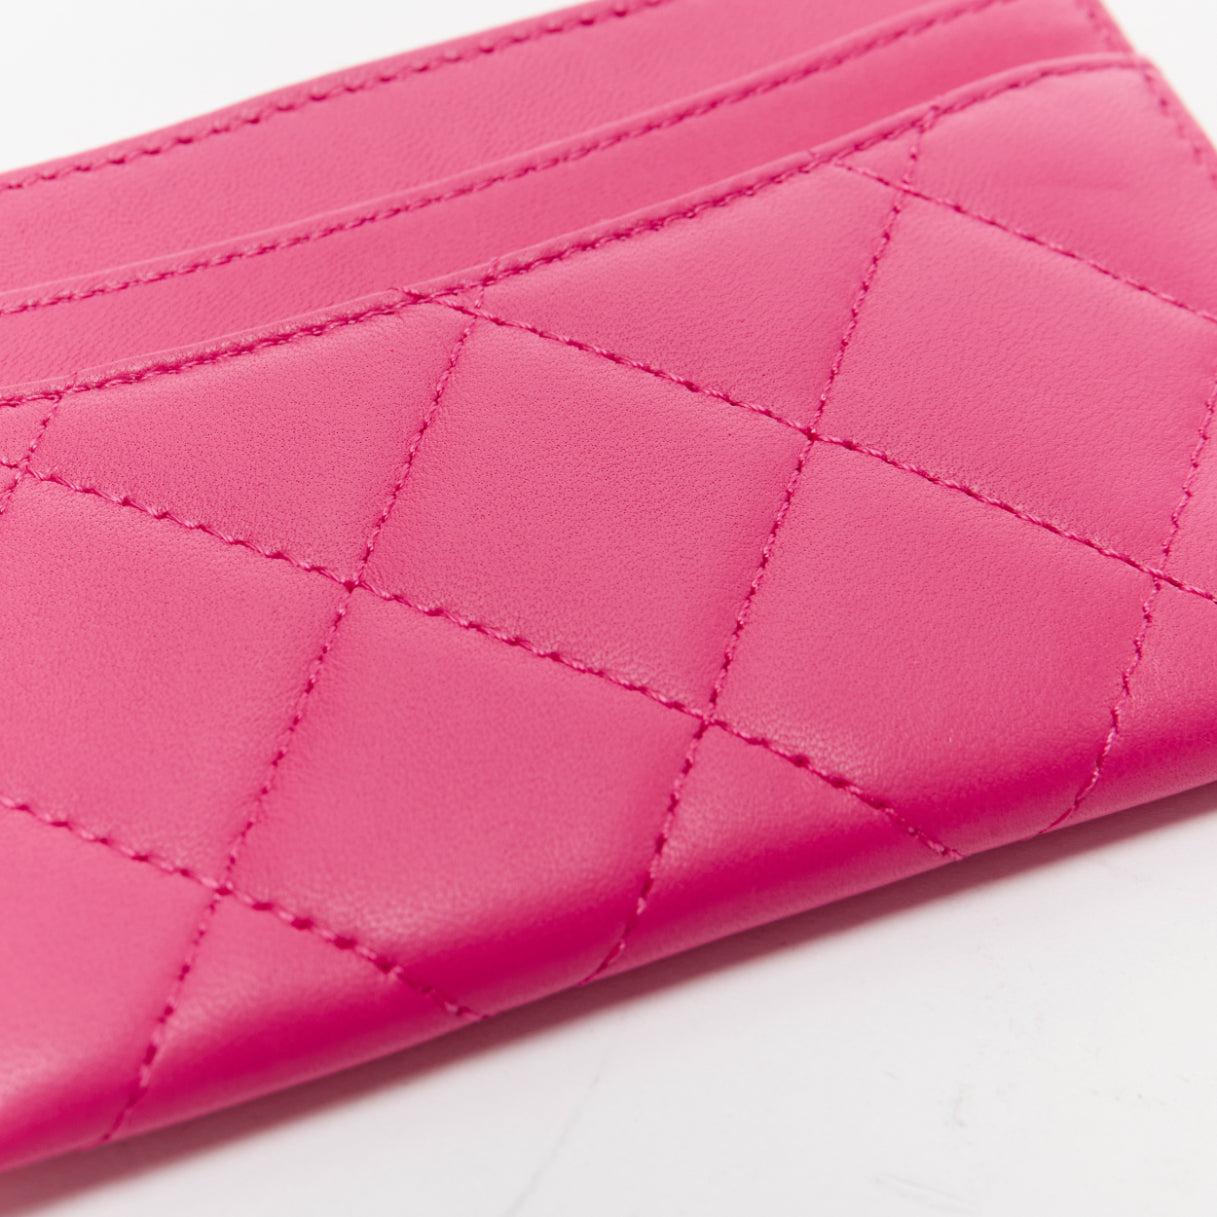 CHANEL bright pink smooth leather CC logo quilted cardholder For Sale 1